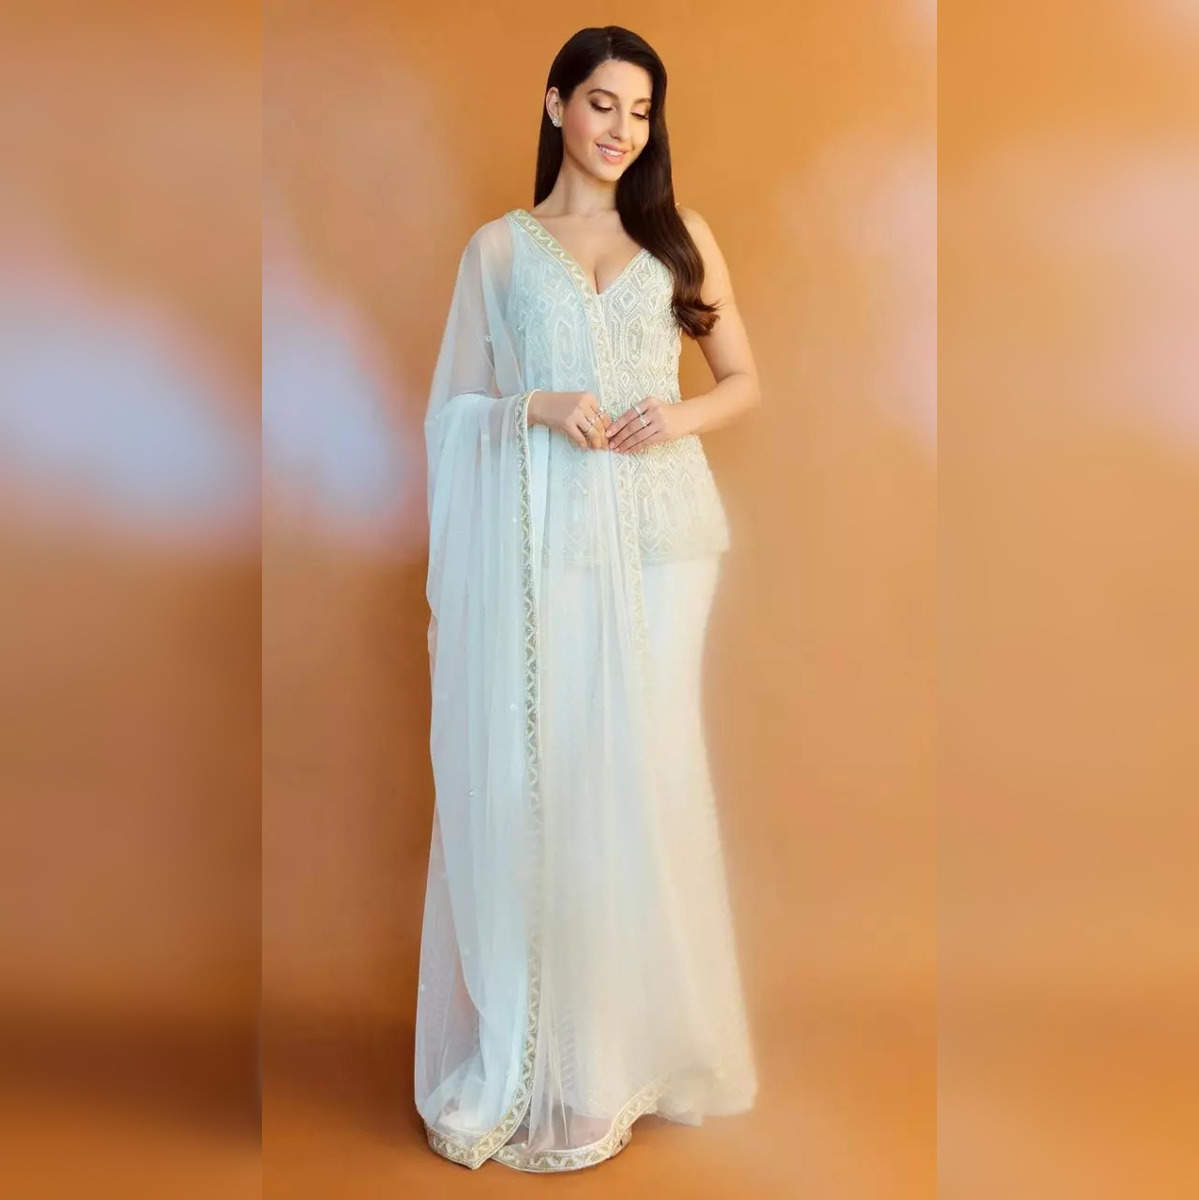 nora fatehi looks like a dream in white ensemble check out stunning photos